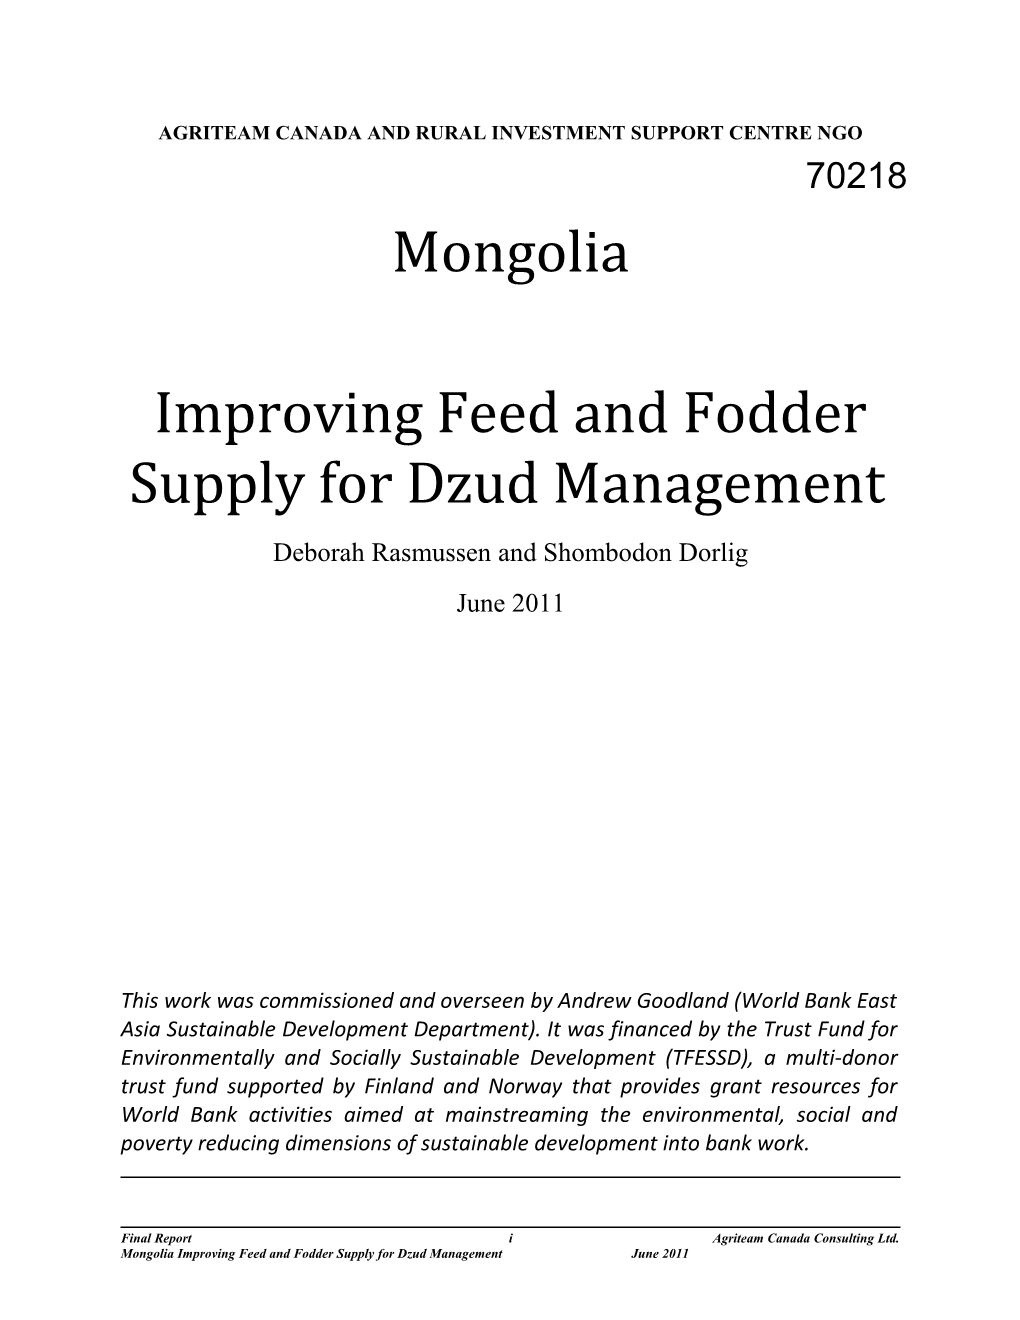 Improving Feed and Fodder Supply for Dzud Management